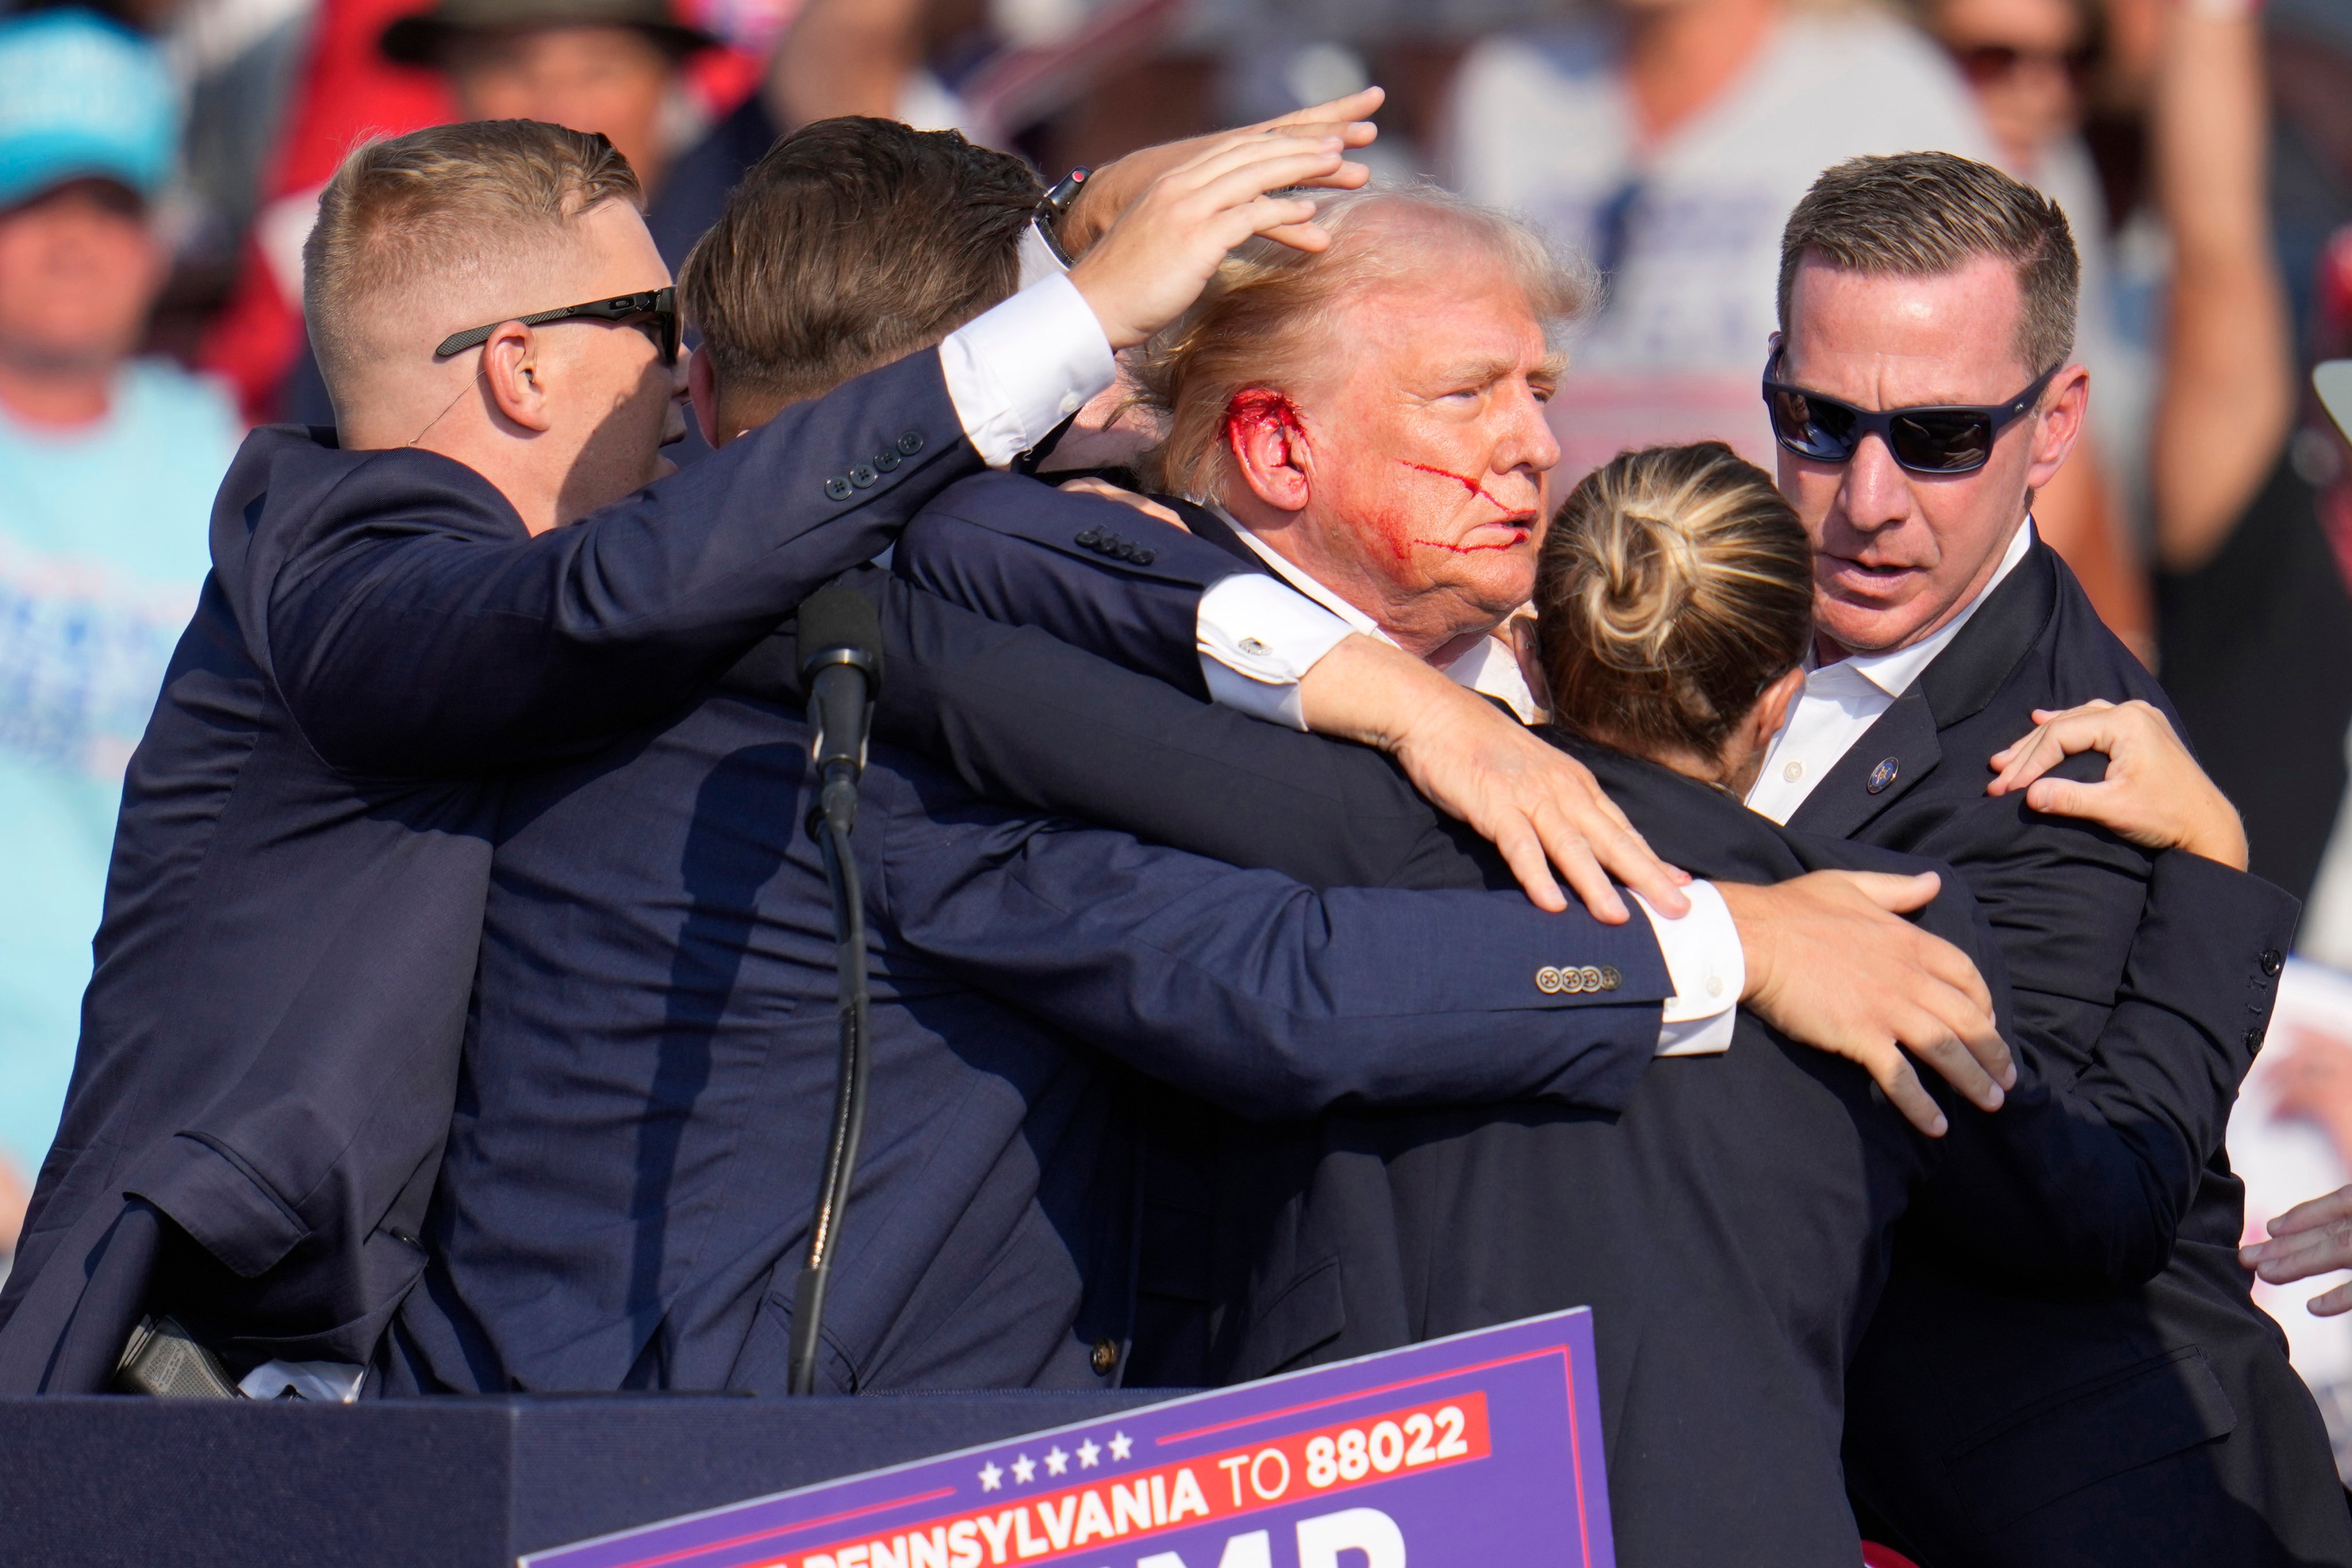 Republican presidential candidate and former president Donald Trump surrounded by Secret Service agents as he is helped off the stage after being shot at a campaign rally in Butler, Pennsylvania, on July 13. Photo: AP